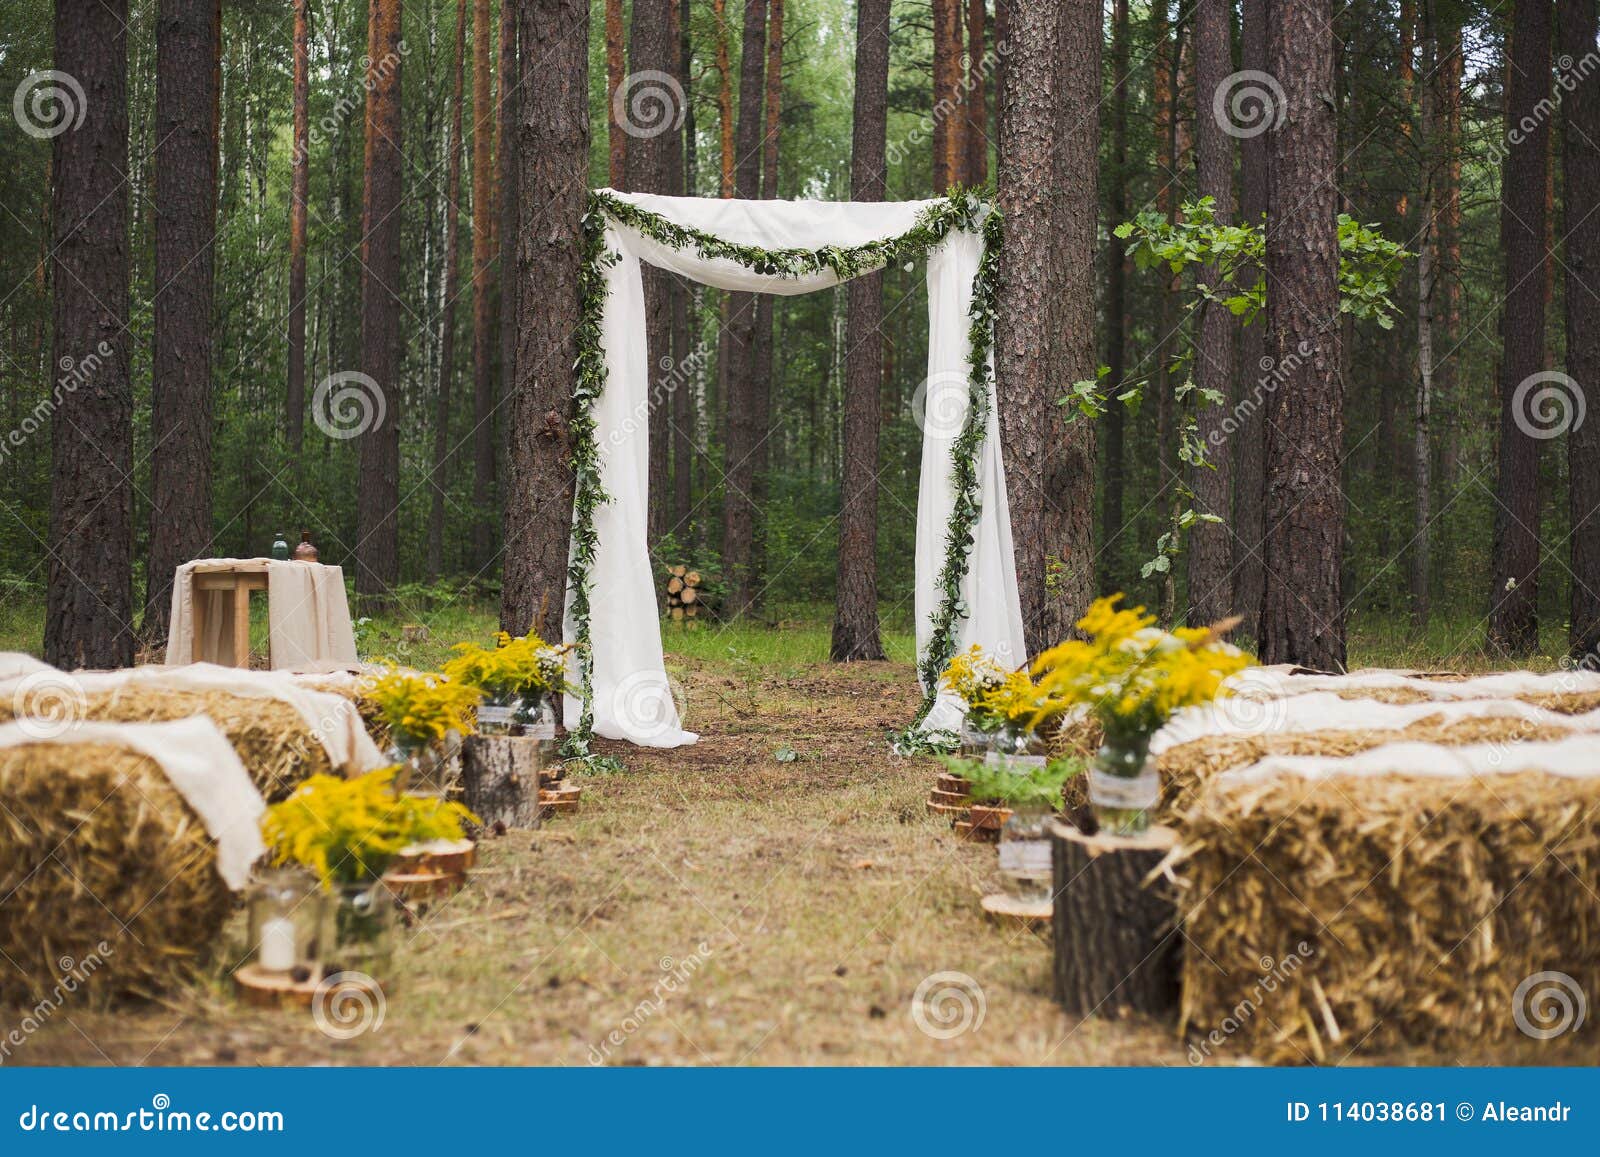 place in old autumn wood for wedding ceremony